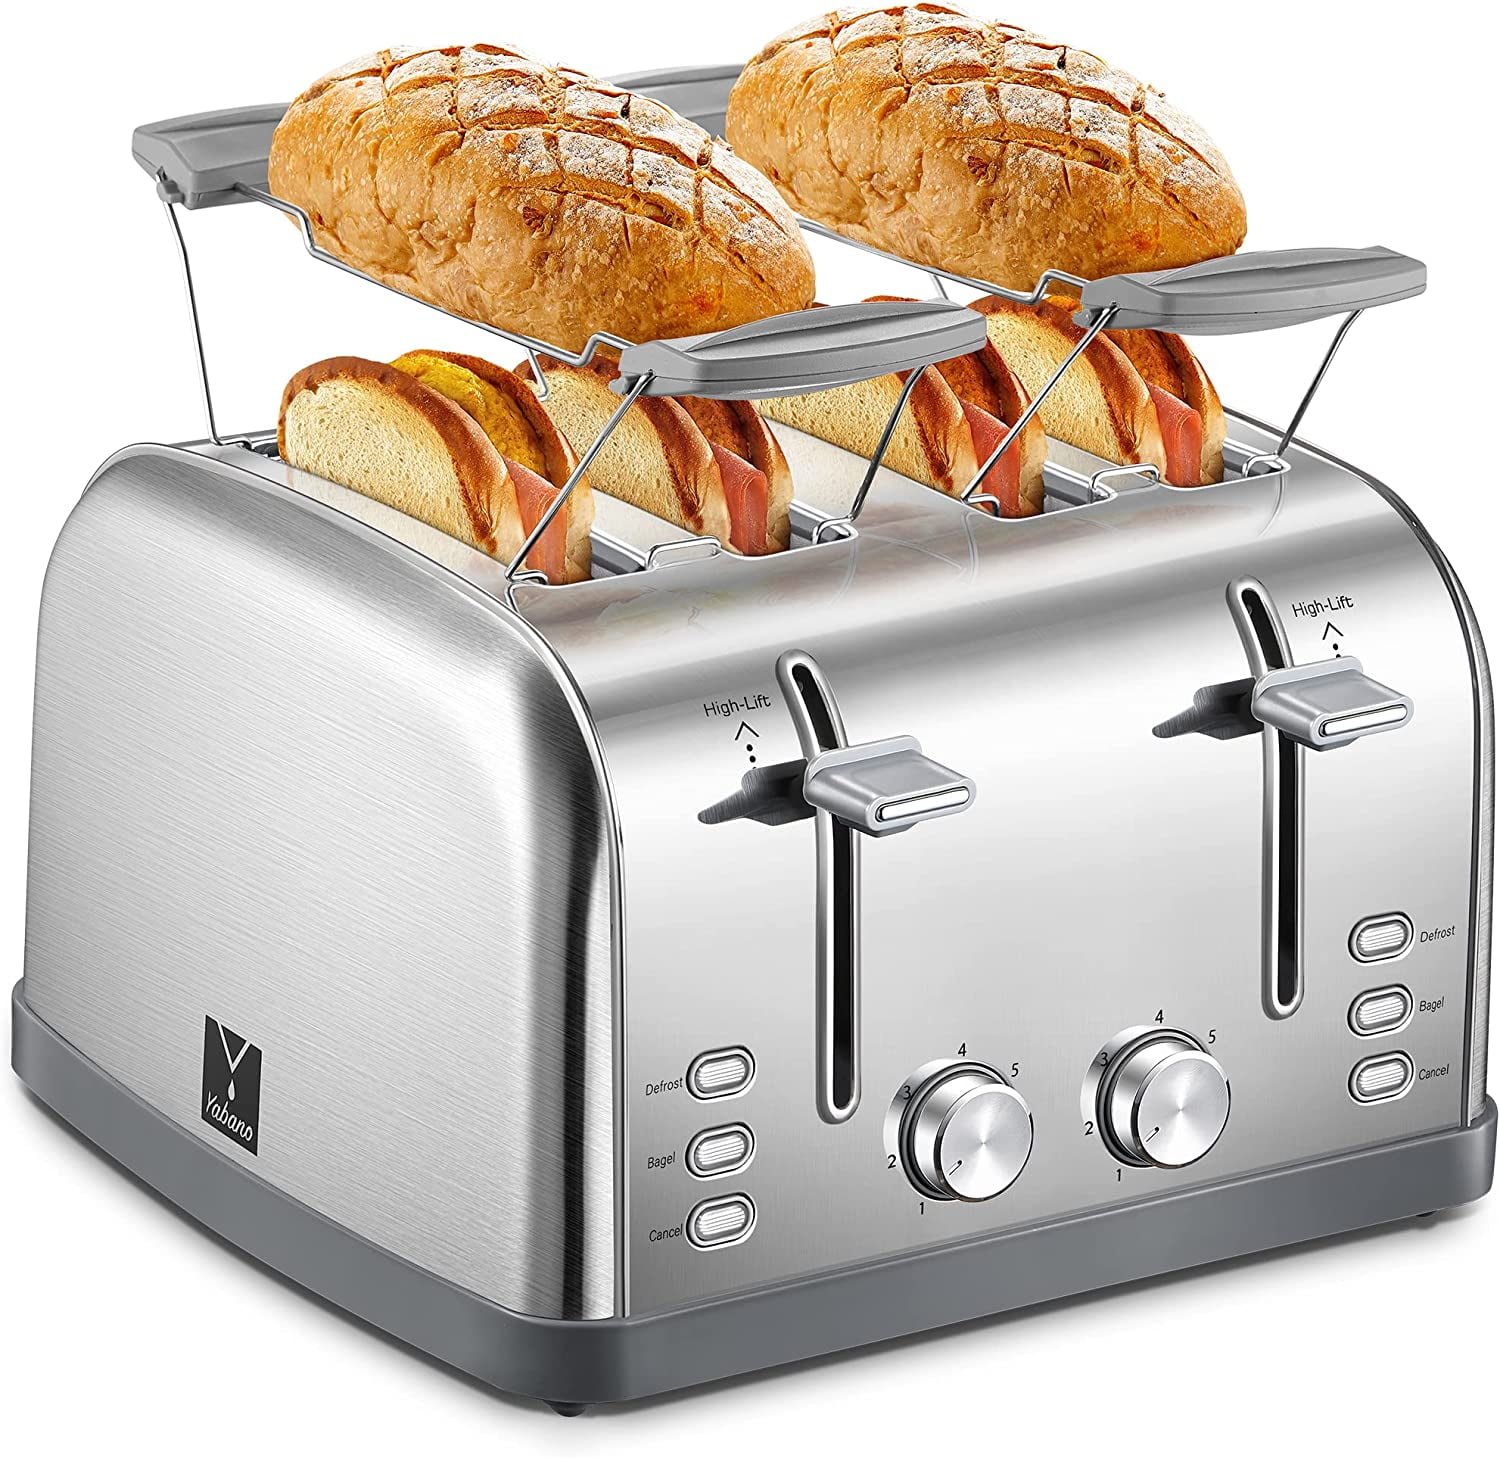 Anfilank Compact 2 Slice Toaster Wide Slots with Warming Rack